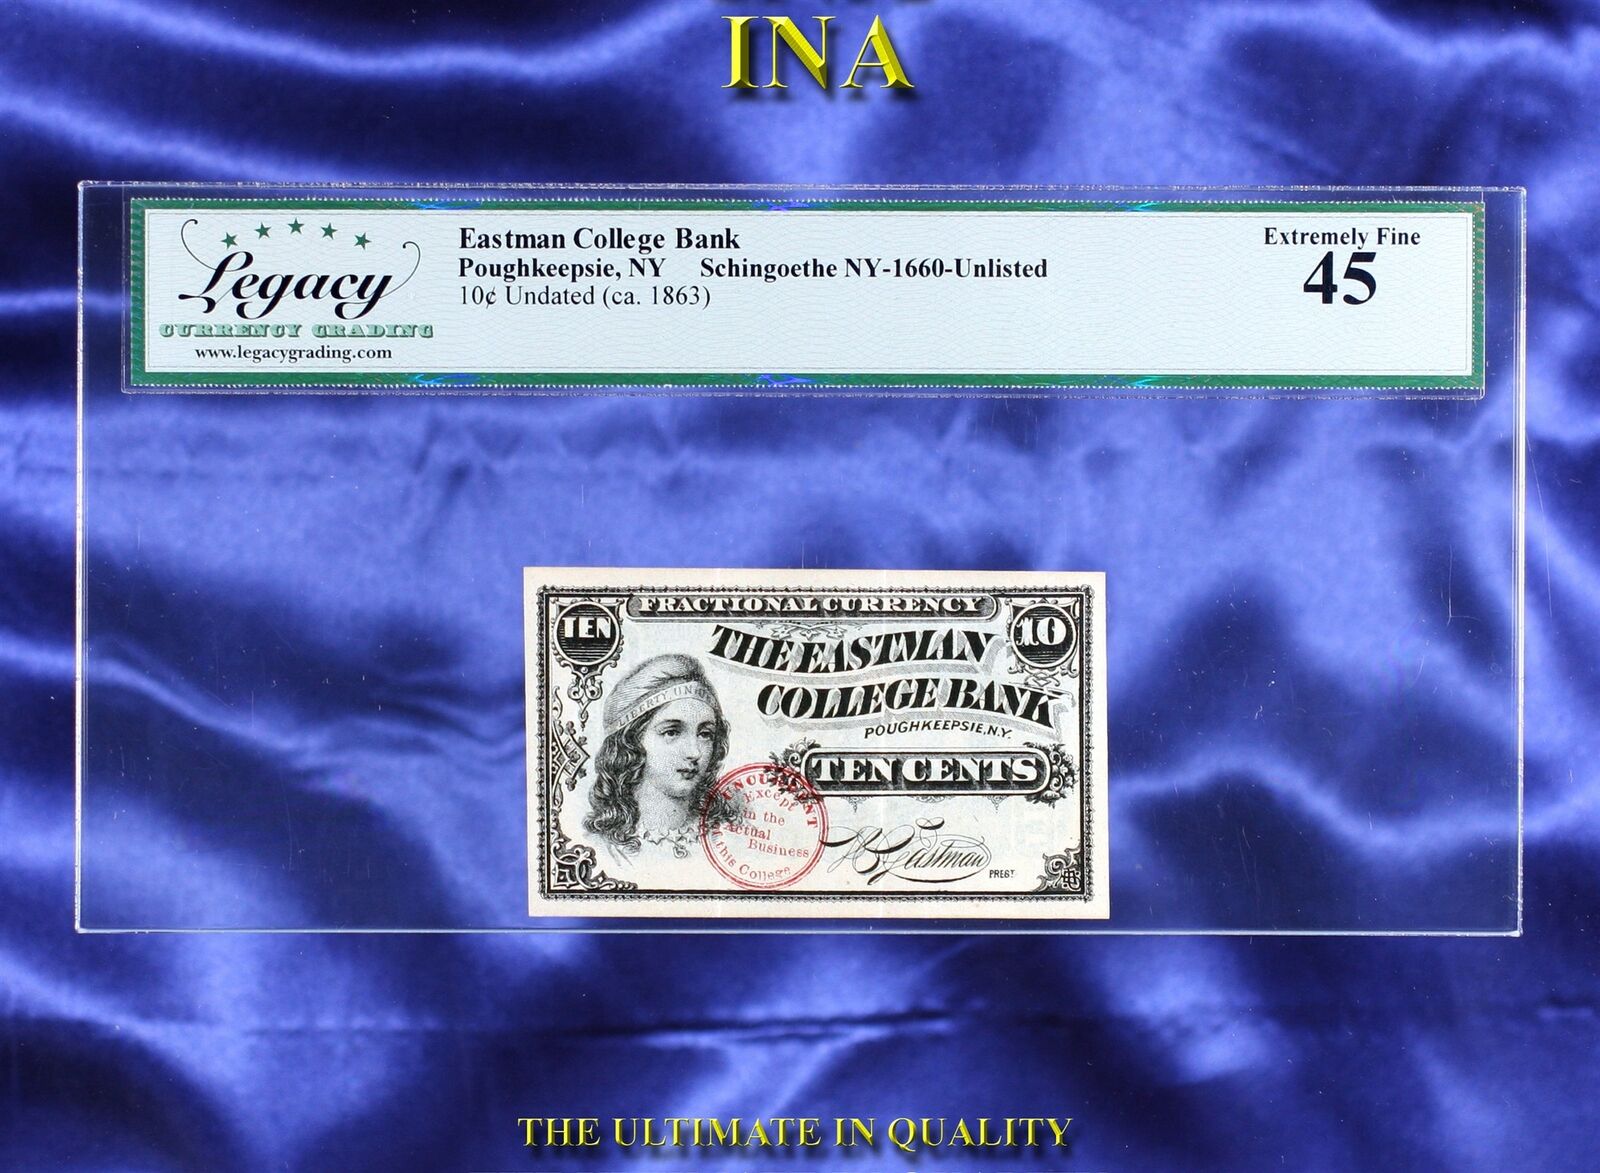 Ina New York Poughkeepsie Eastman College Bank 10-cents Legacy 45 Rare Unlisted